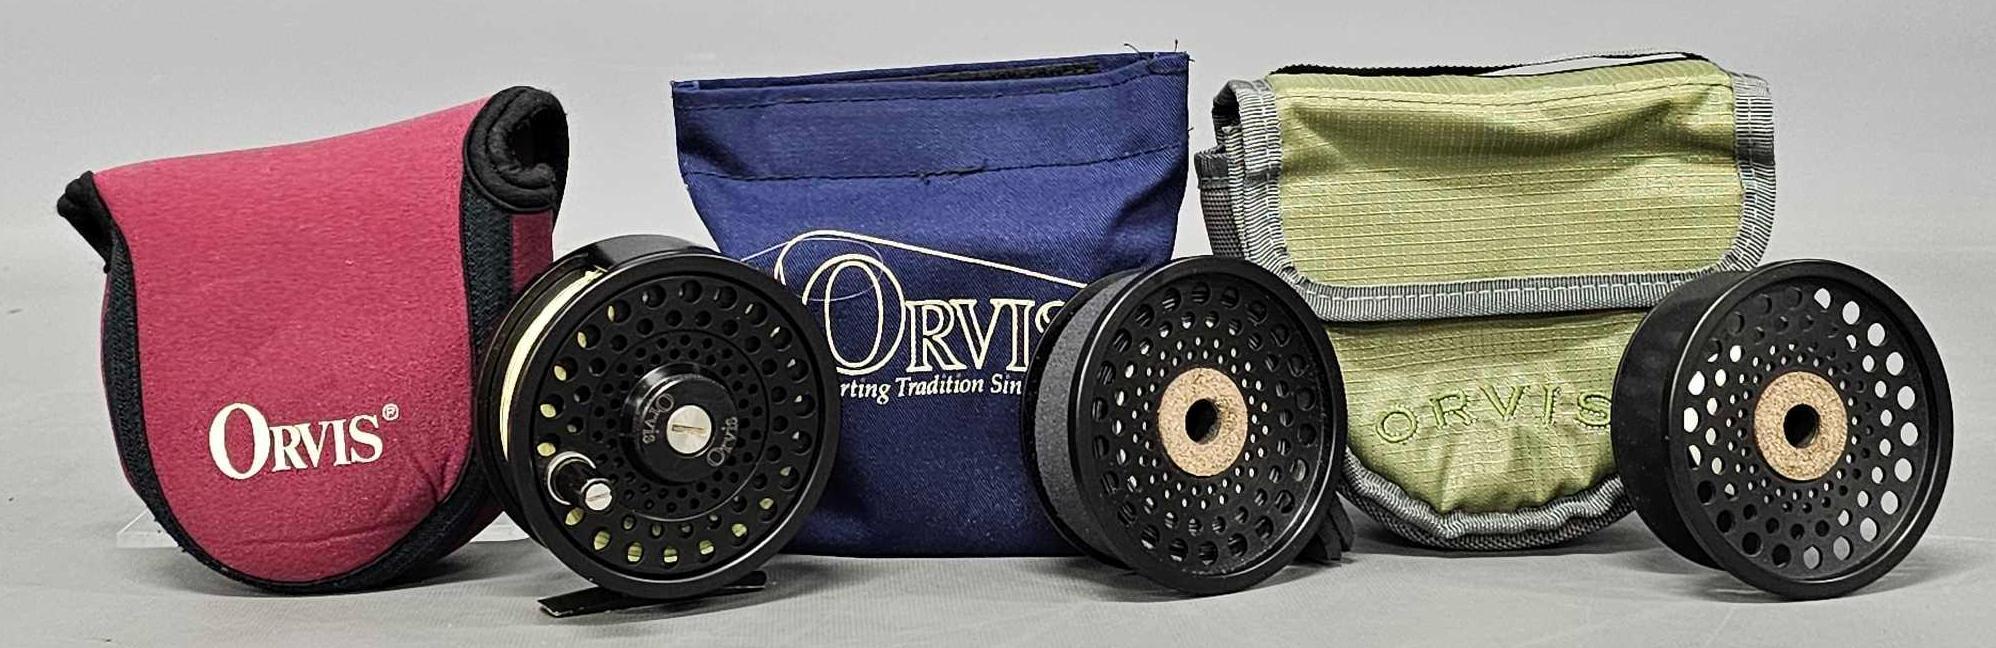 Orvis DXR Anti-reverse 7/8 fly reel with 2 extra